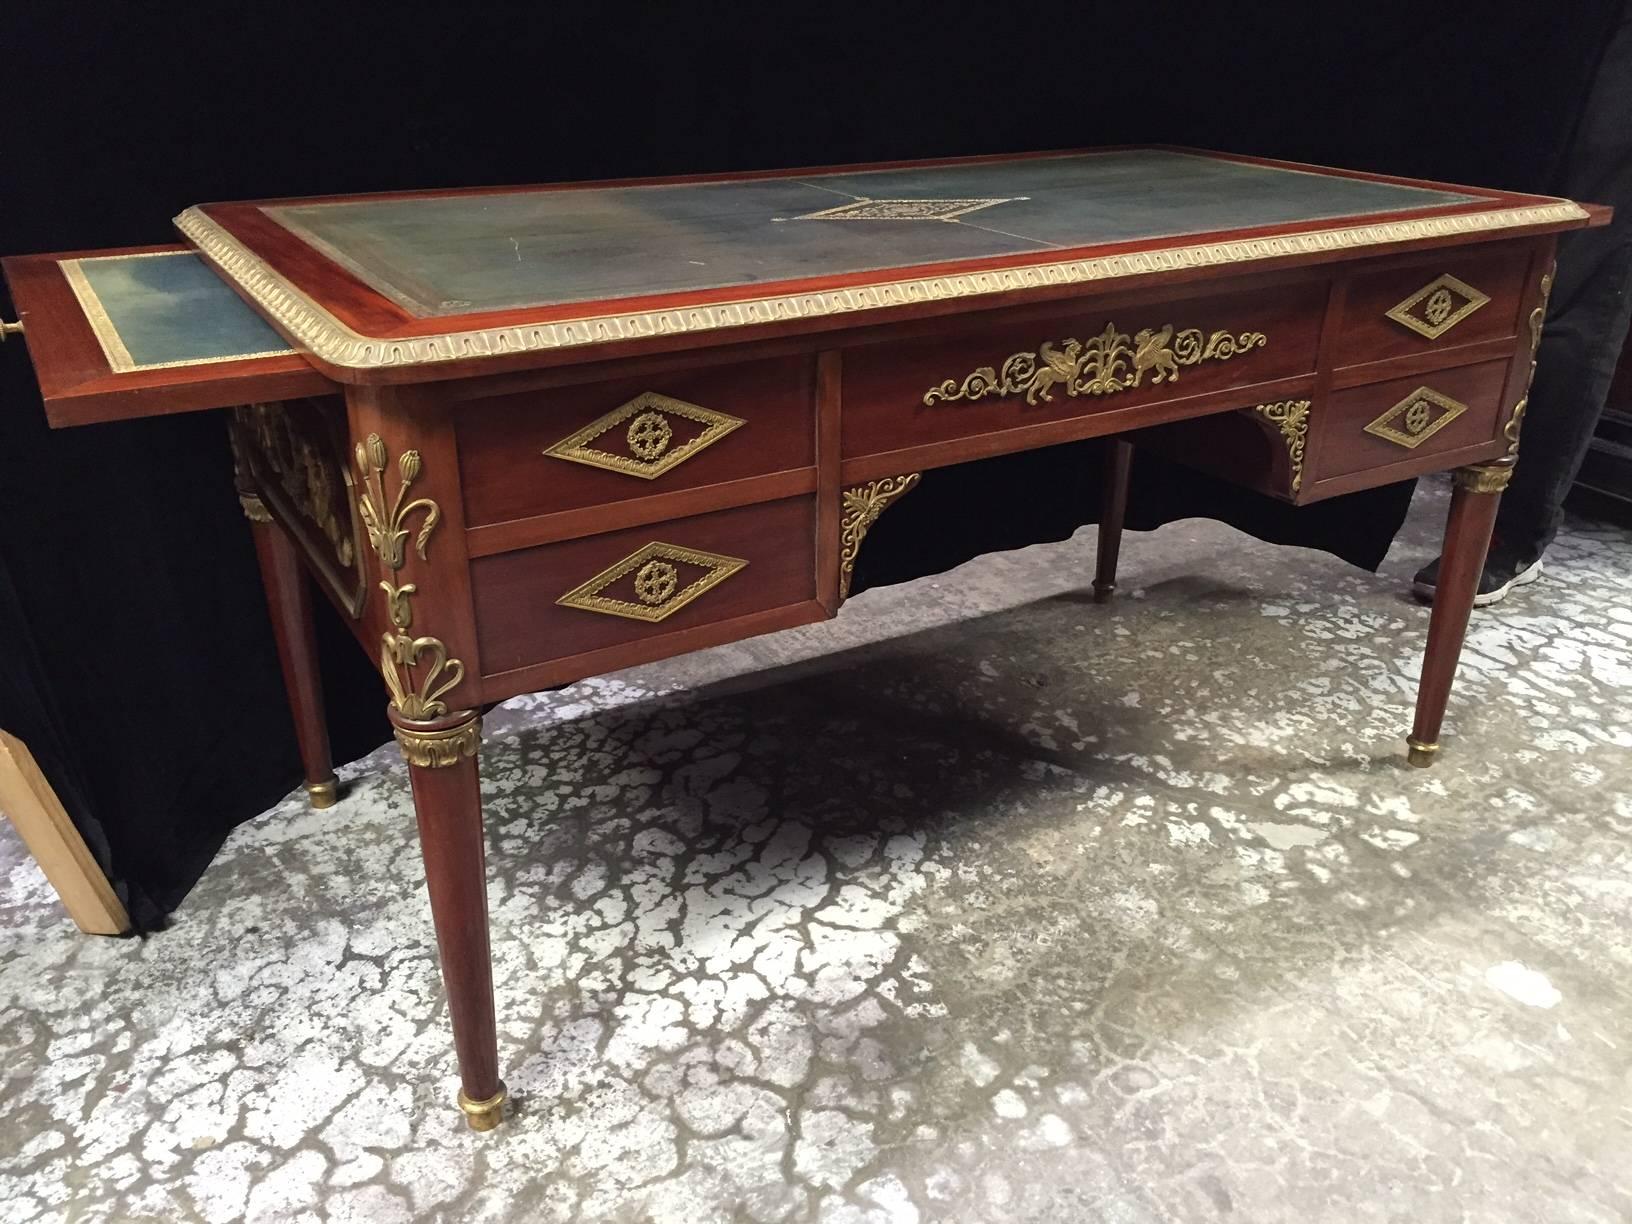 Impressive 19th century fine Empire style gilt bronze-mounted mahogany five drawer bureau plat with leather top and two side slides, on four round tapered legs. All sides with finely chased ormolu mounts. 

The two slides both extend an additional